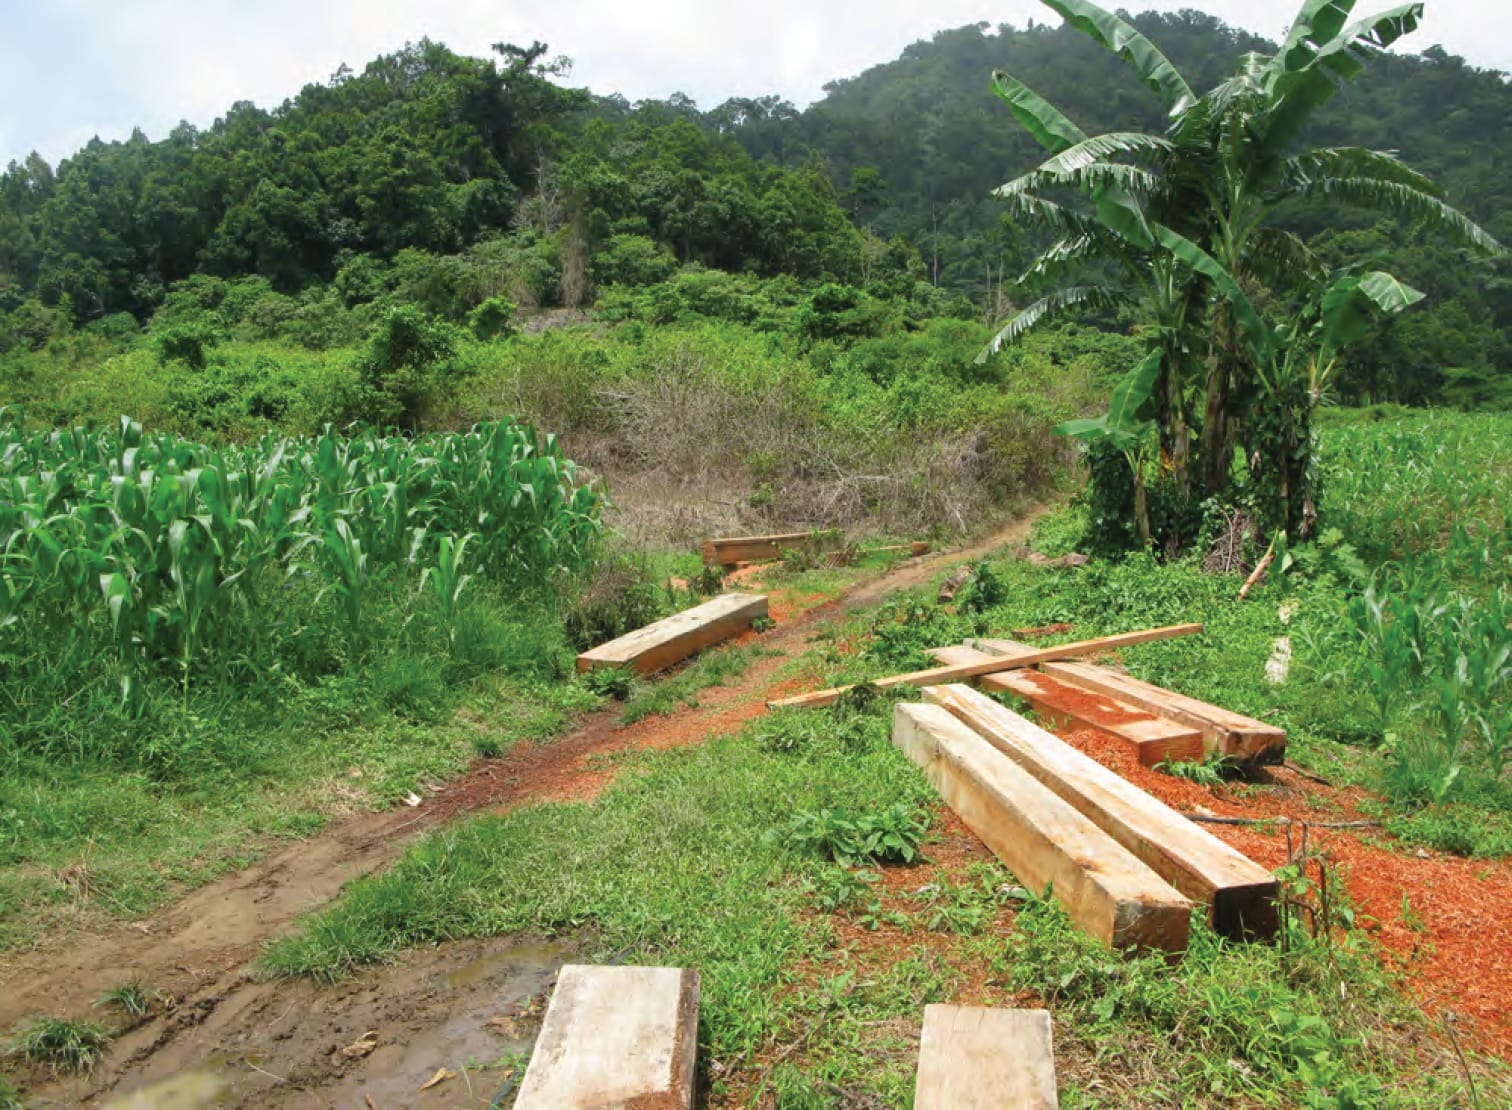 Illegal logging in Phillippines (Wikimediia Commons)